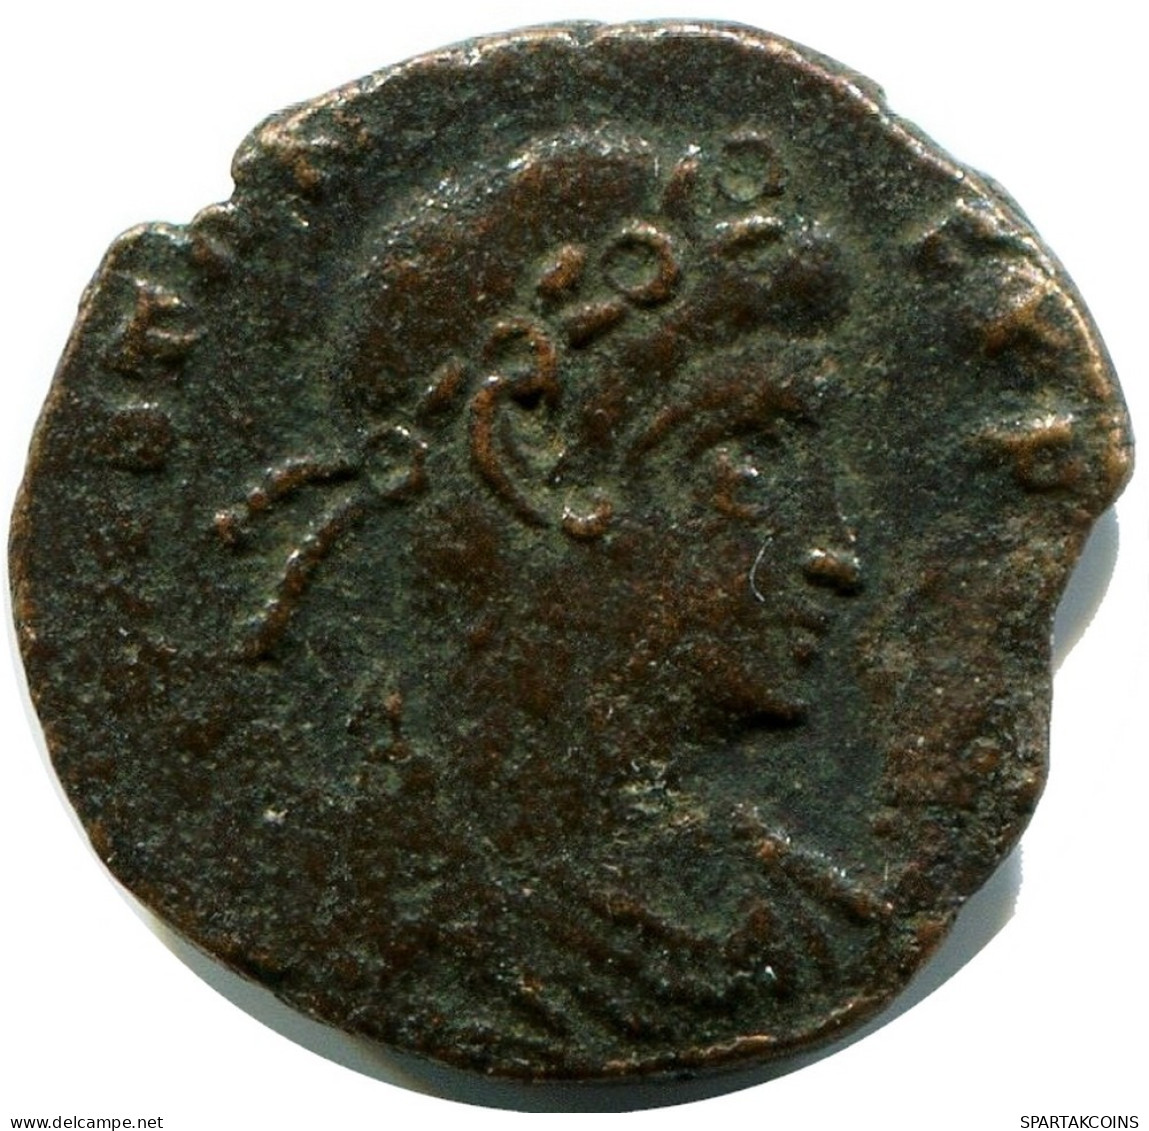 CONSTANS MINTED IN ROME ITALY FROM THE ROYAL ONTARIO MUSEUM #ANC11498.14.E.A - L'Empire Chrétien (307 à 363)